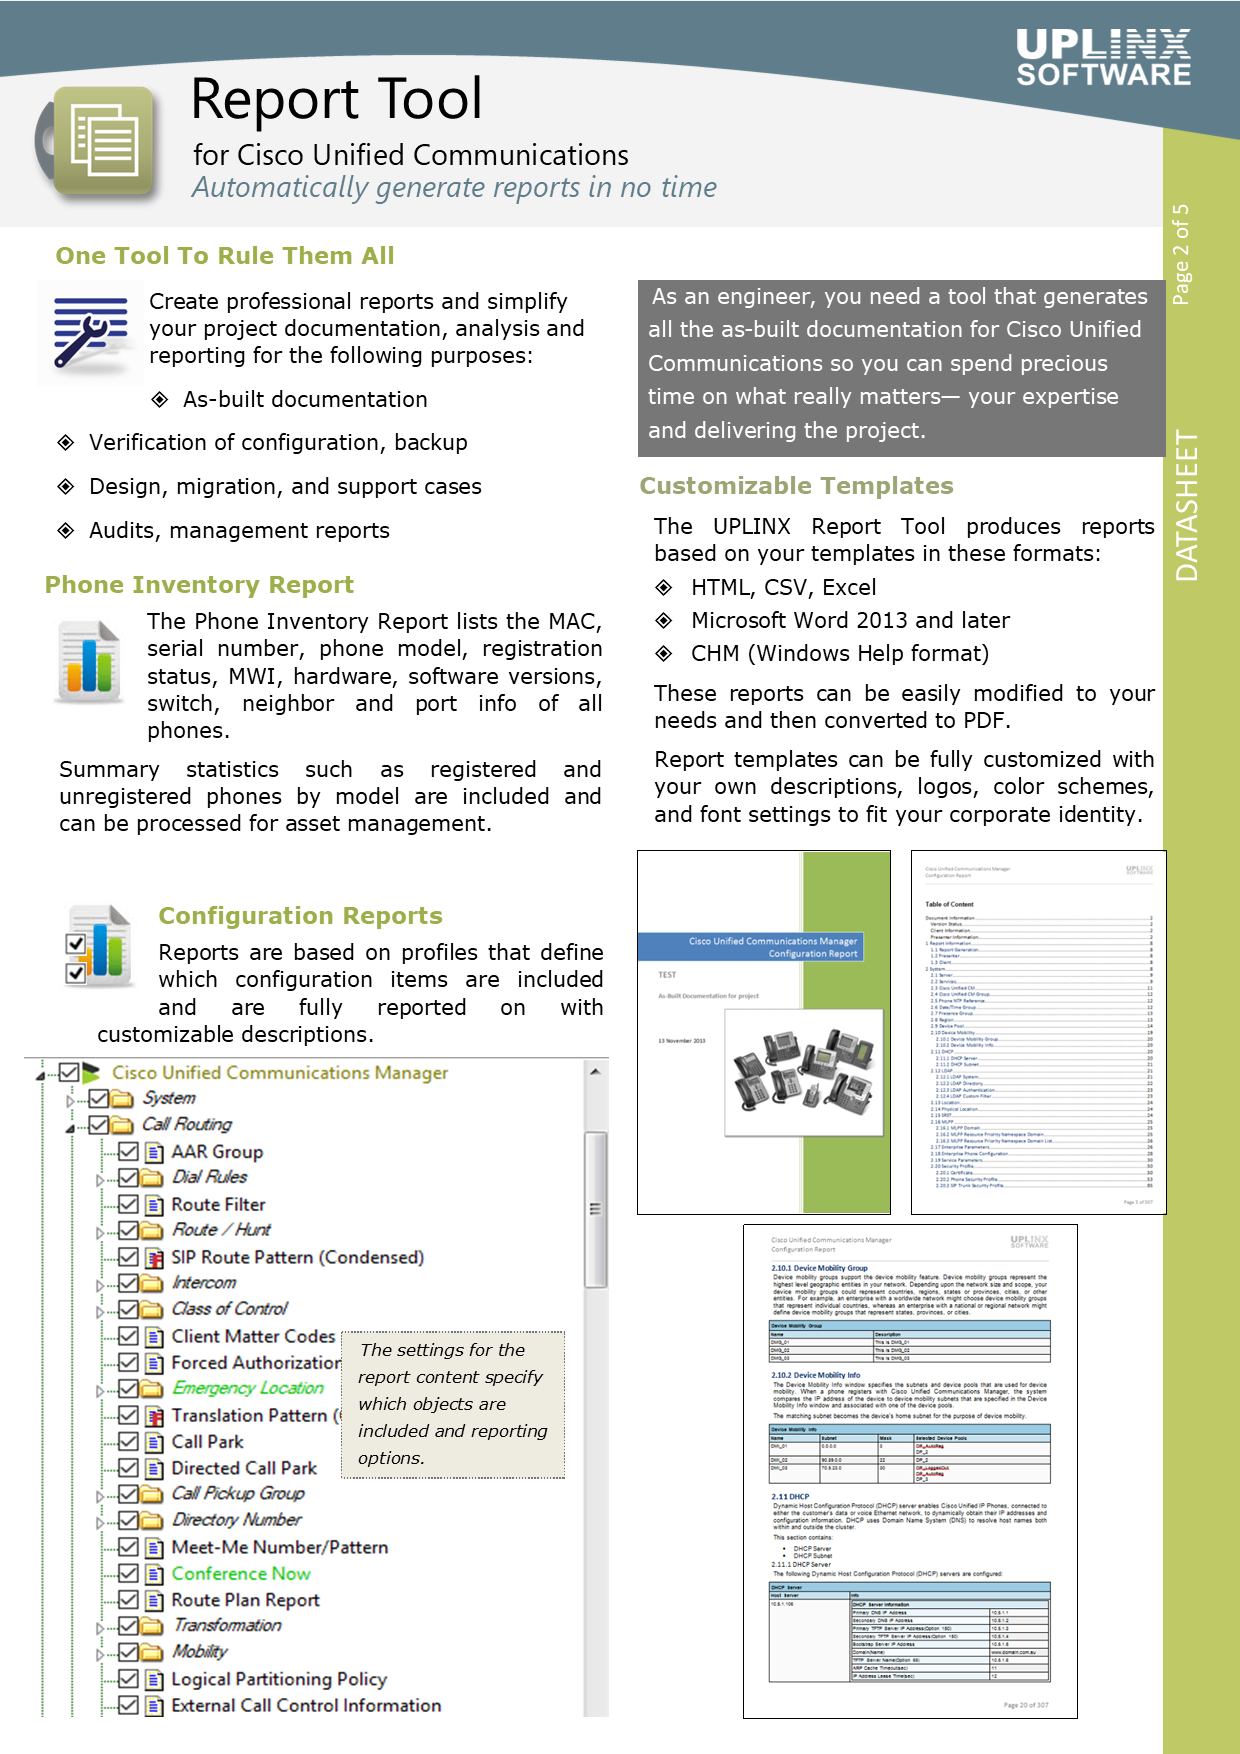 UPLINX Report Tool: Datasheet and Specification (page 2)